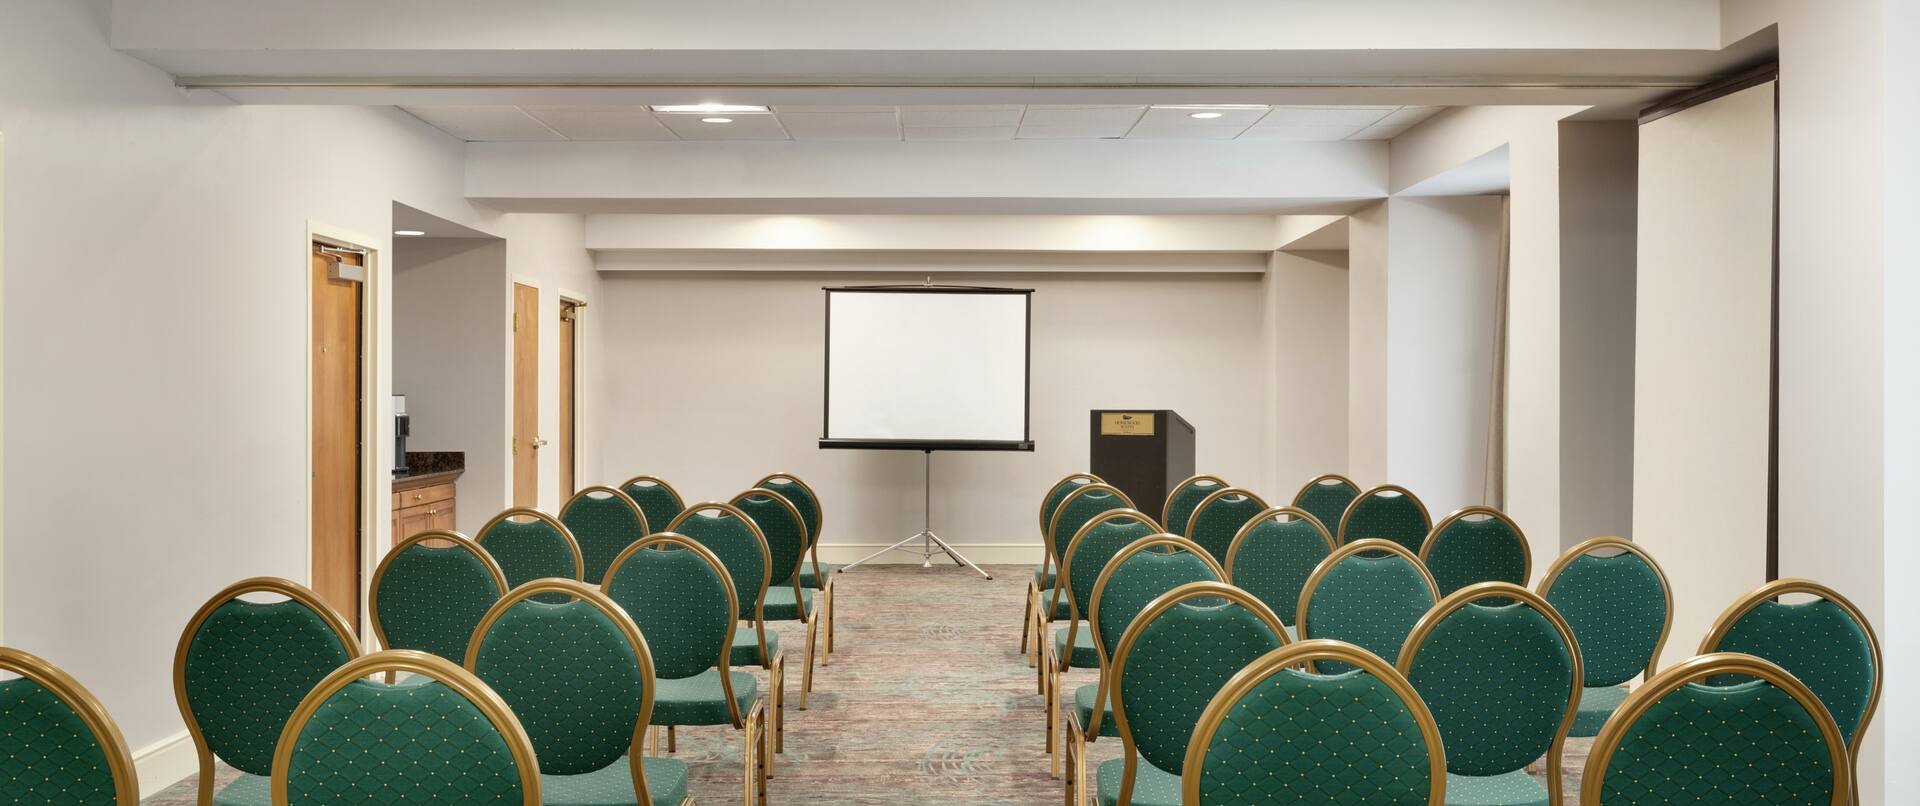 Spacious meeting room fully set in theater style with ample seating, projector screen, and podium at front of room.